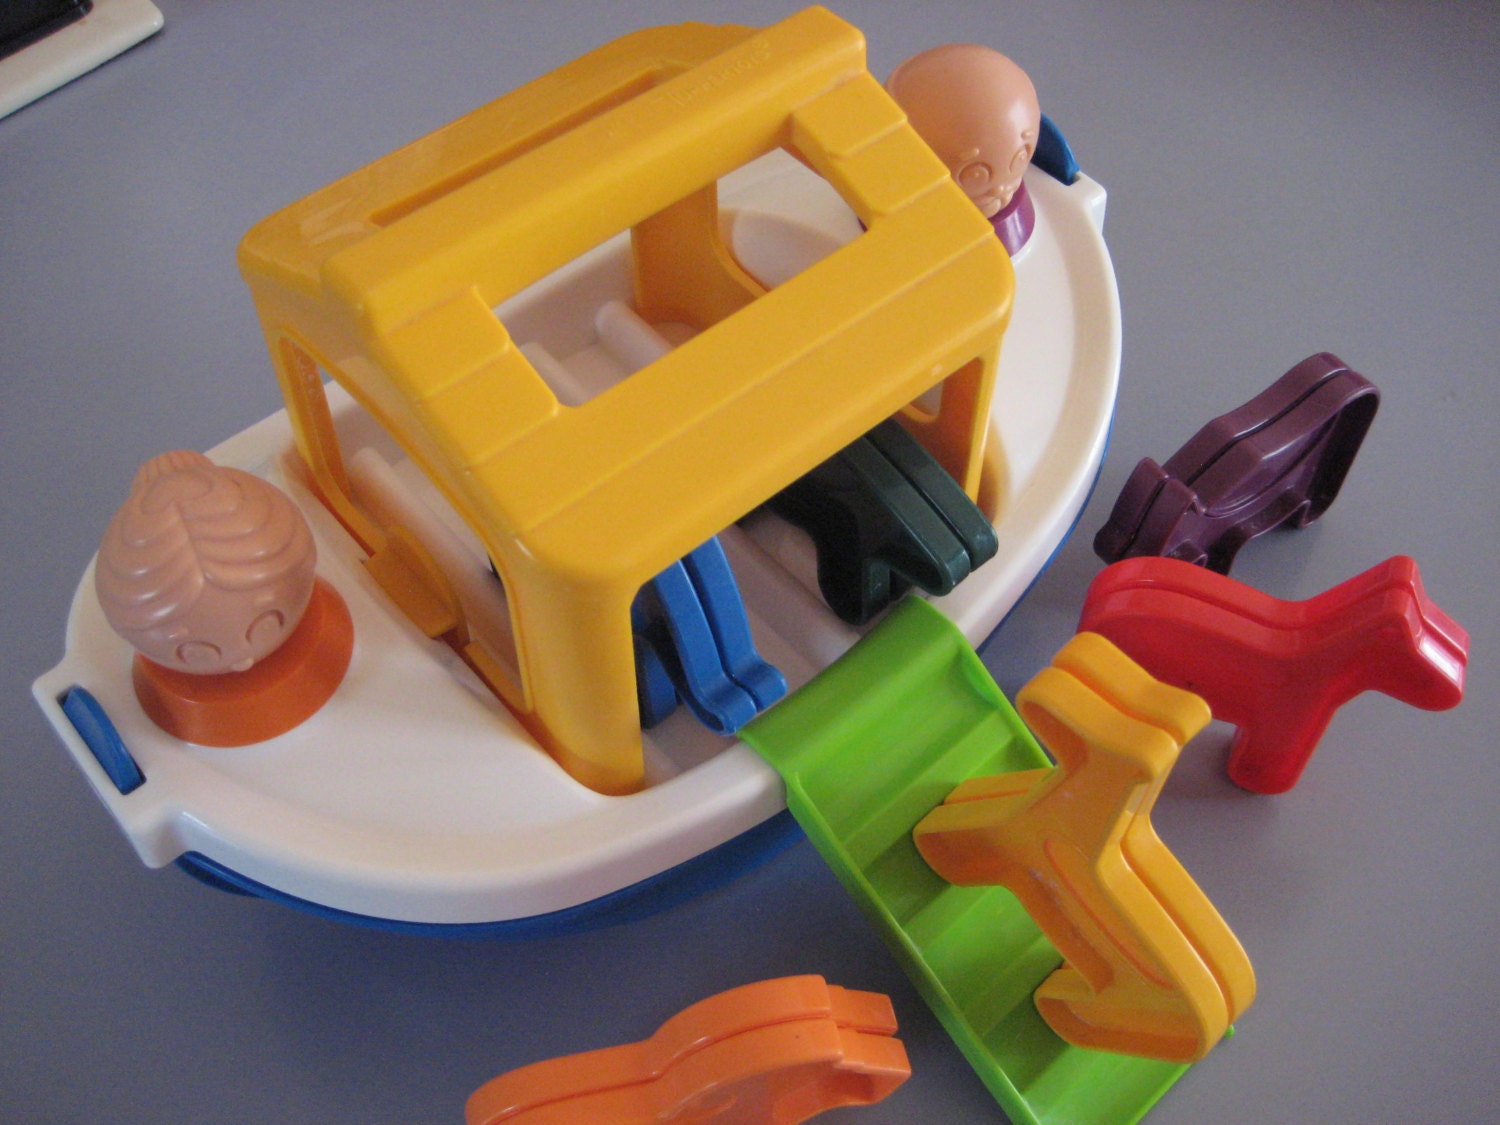 Tupperware Noah's Ark Little People Toy with Cookie Cutter